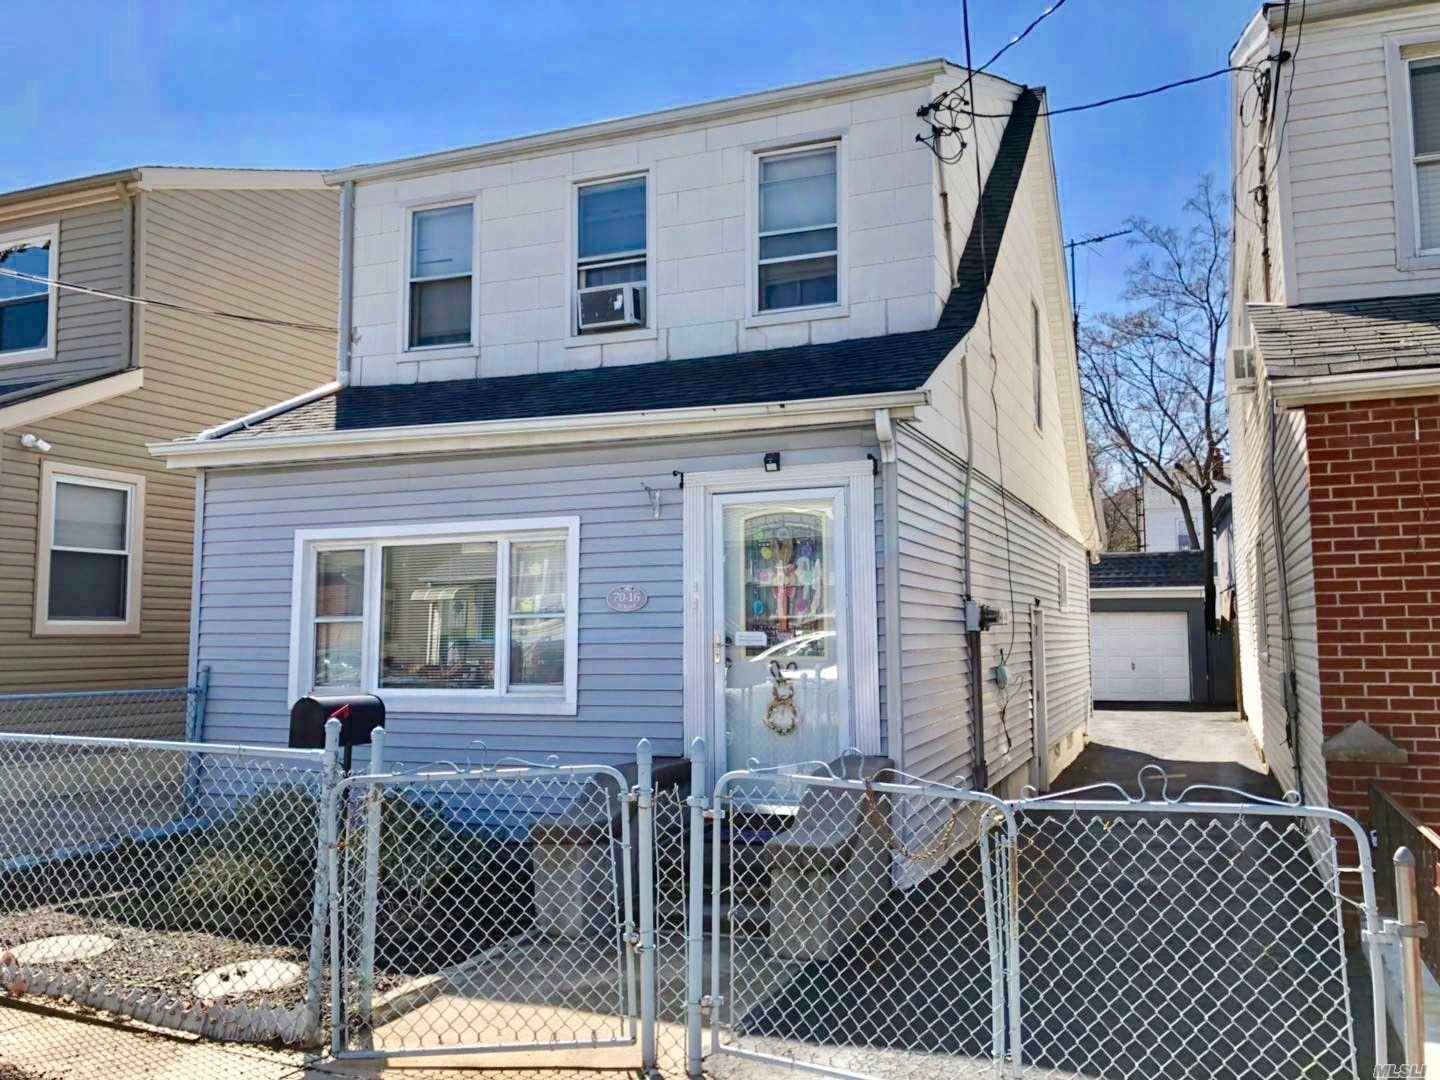 Legal 2 Family Detached House In The Heart Of Maspeth, Private Driveway With 2 Parking Garages In The Rear Of The House.